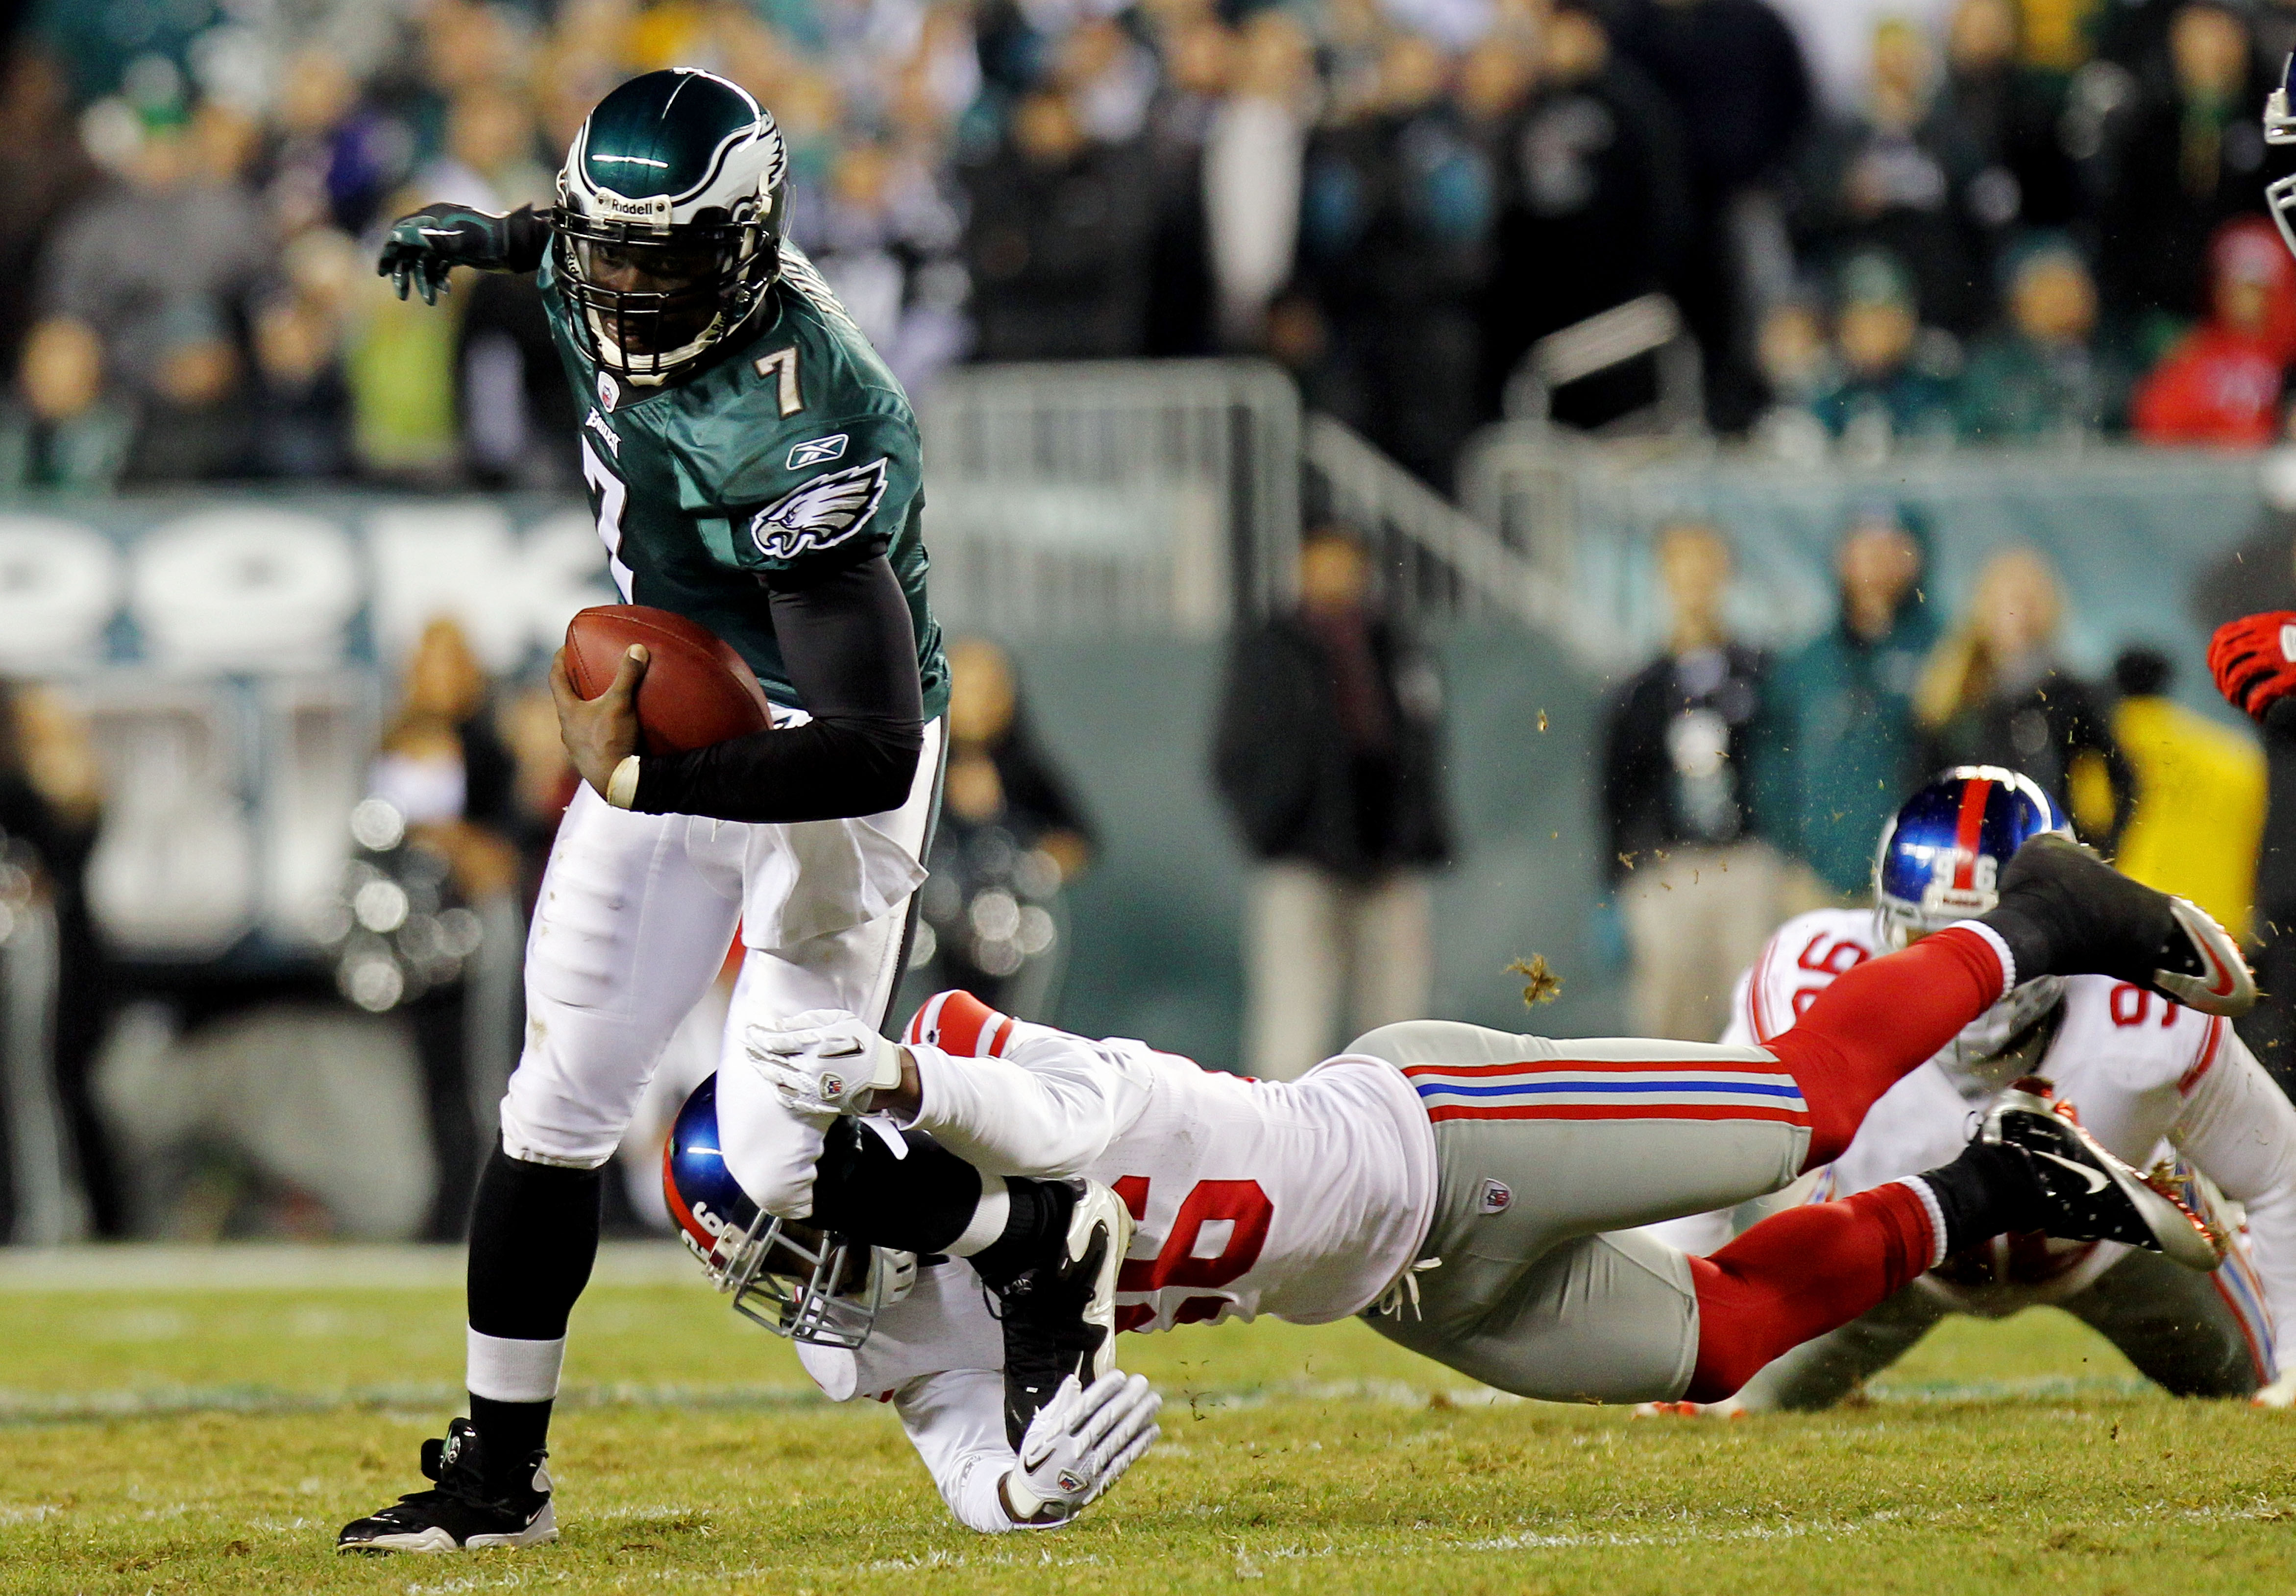 PHILADELPHIA - NOVEMBER 21:  Michael Vick #7 of the Philadelphia Eagles runs with the ball against Antrel Rolle #26 of the New York Giants at Lincoln Financial Field on November 21, 2010 in Philadelphia, Pennsylvania.  (Photo by Nick Laham/Getty Images)